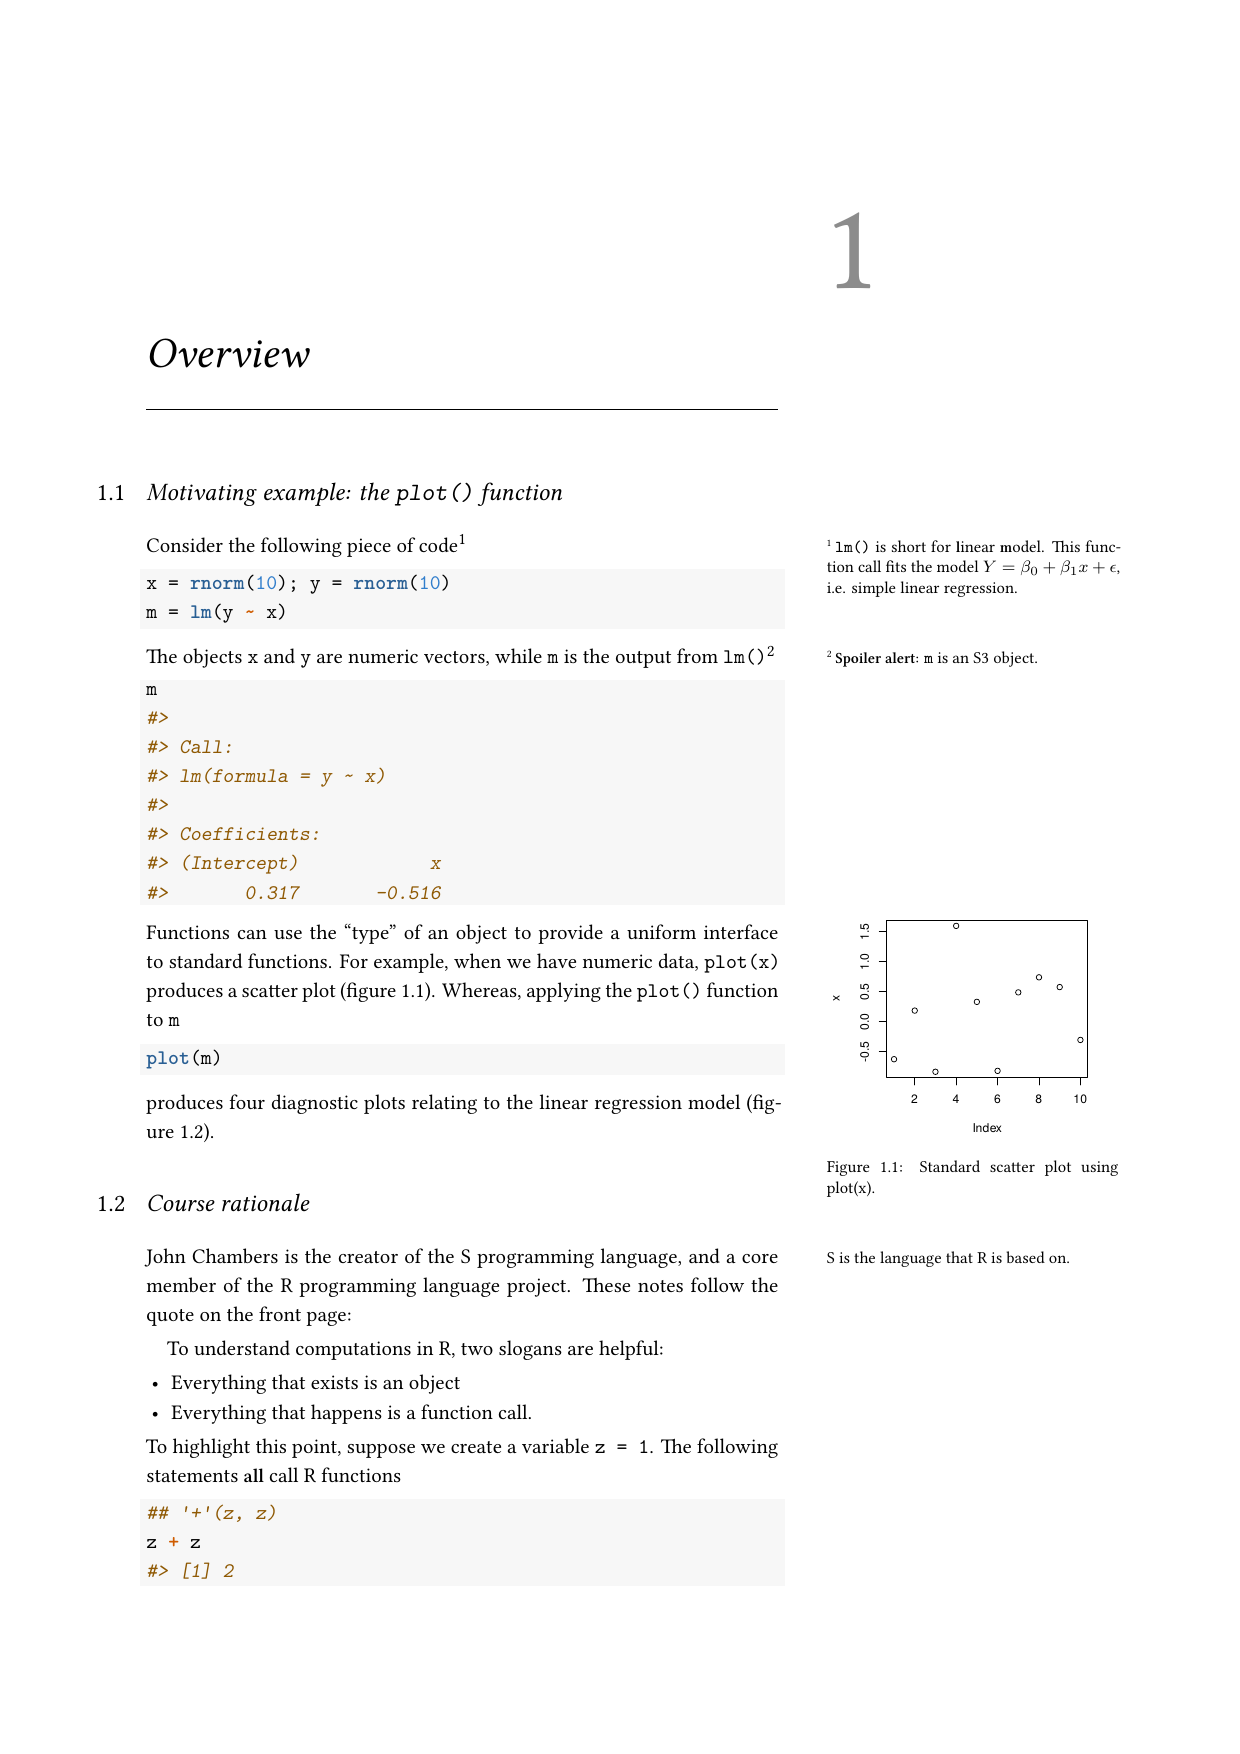 Example course material for 'Object Oriented Programming in R